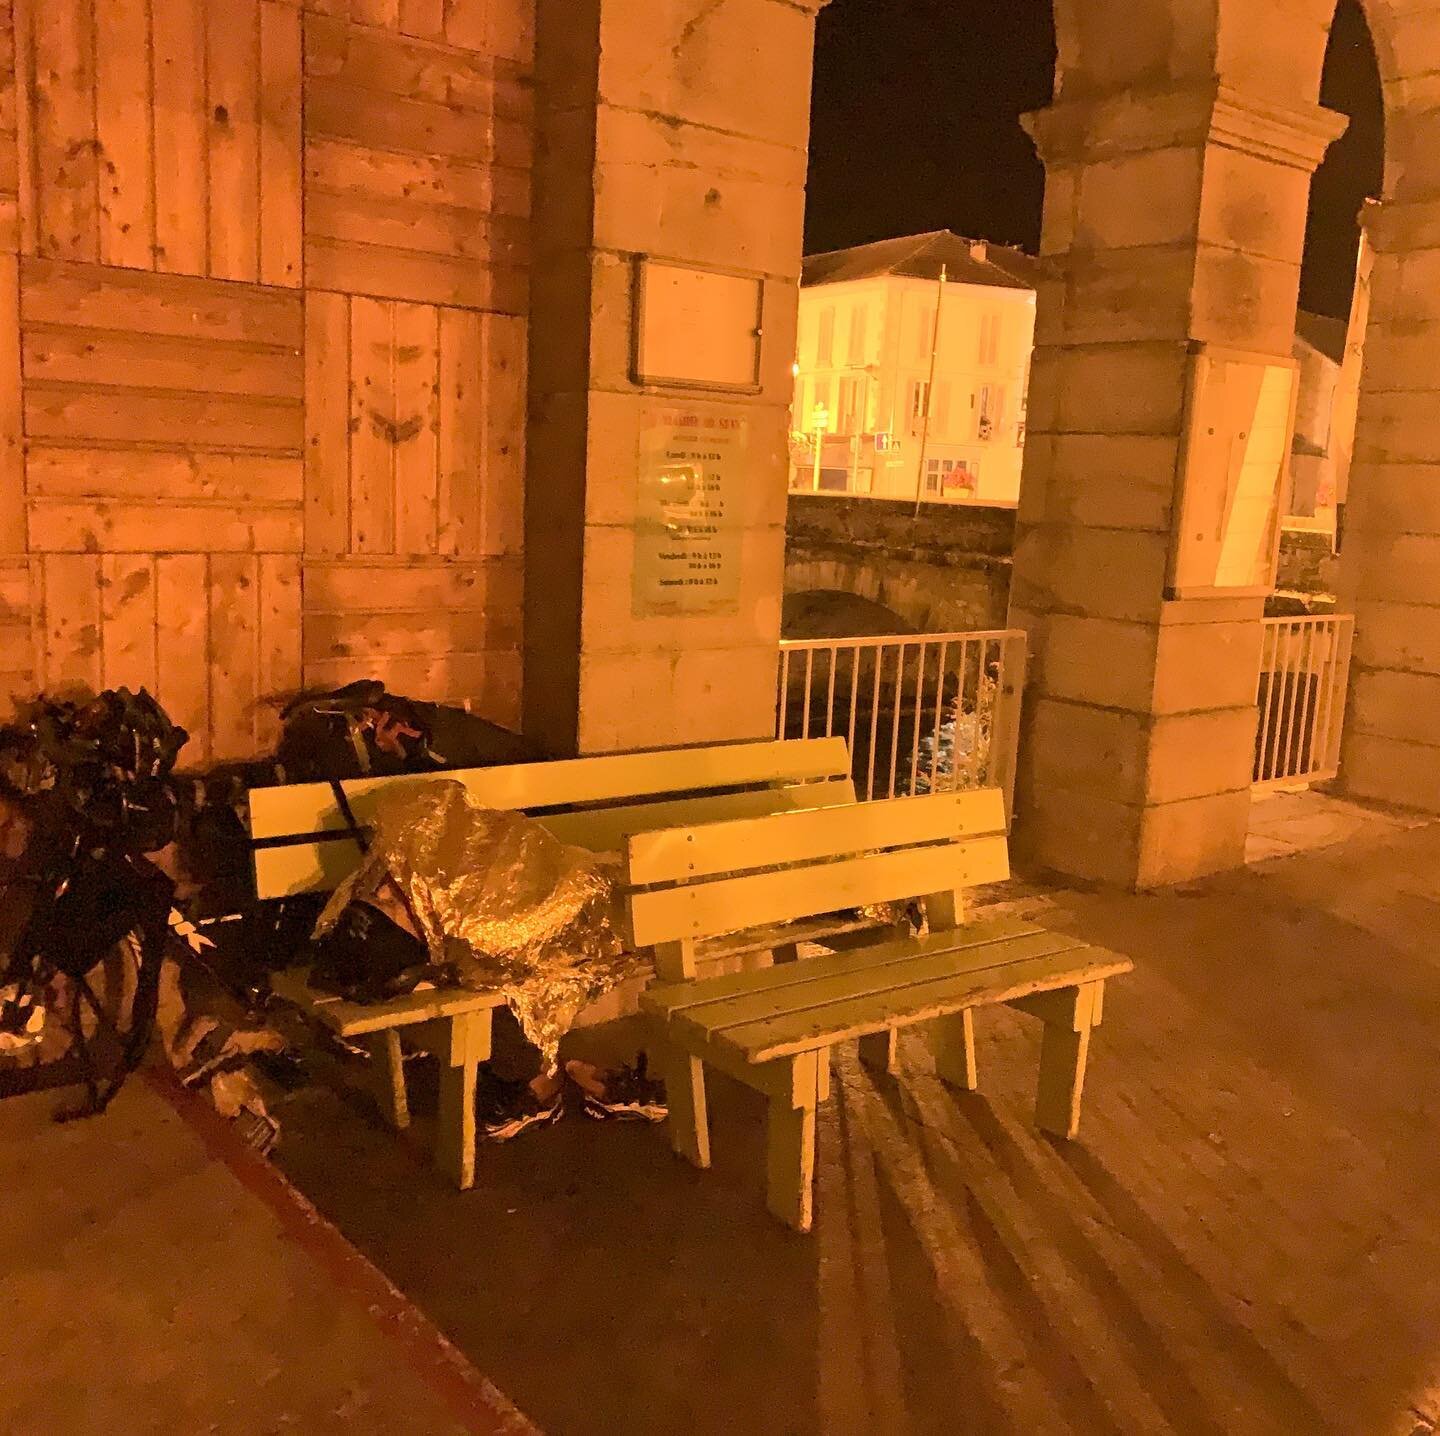 Day 4 / 4e Journ&eacute;e - Ultra Bike Pursuit

Participants were on their way early this morning for their fourth day. 

Yvonnick and Chris each found a roof to sleep a few hours. Yvonnick found a bench under the village city hall next to the river 